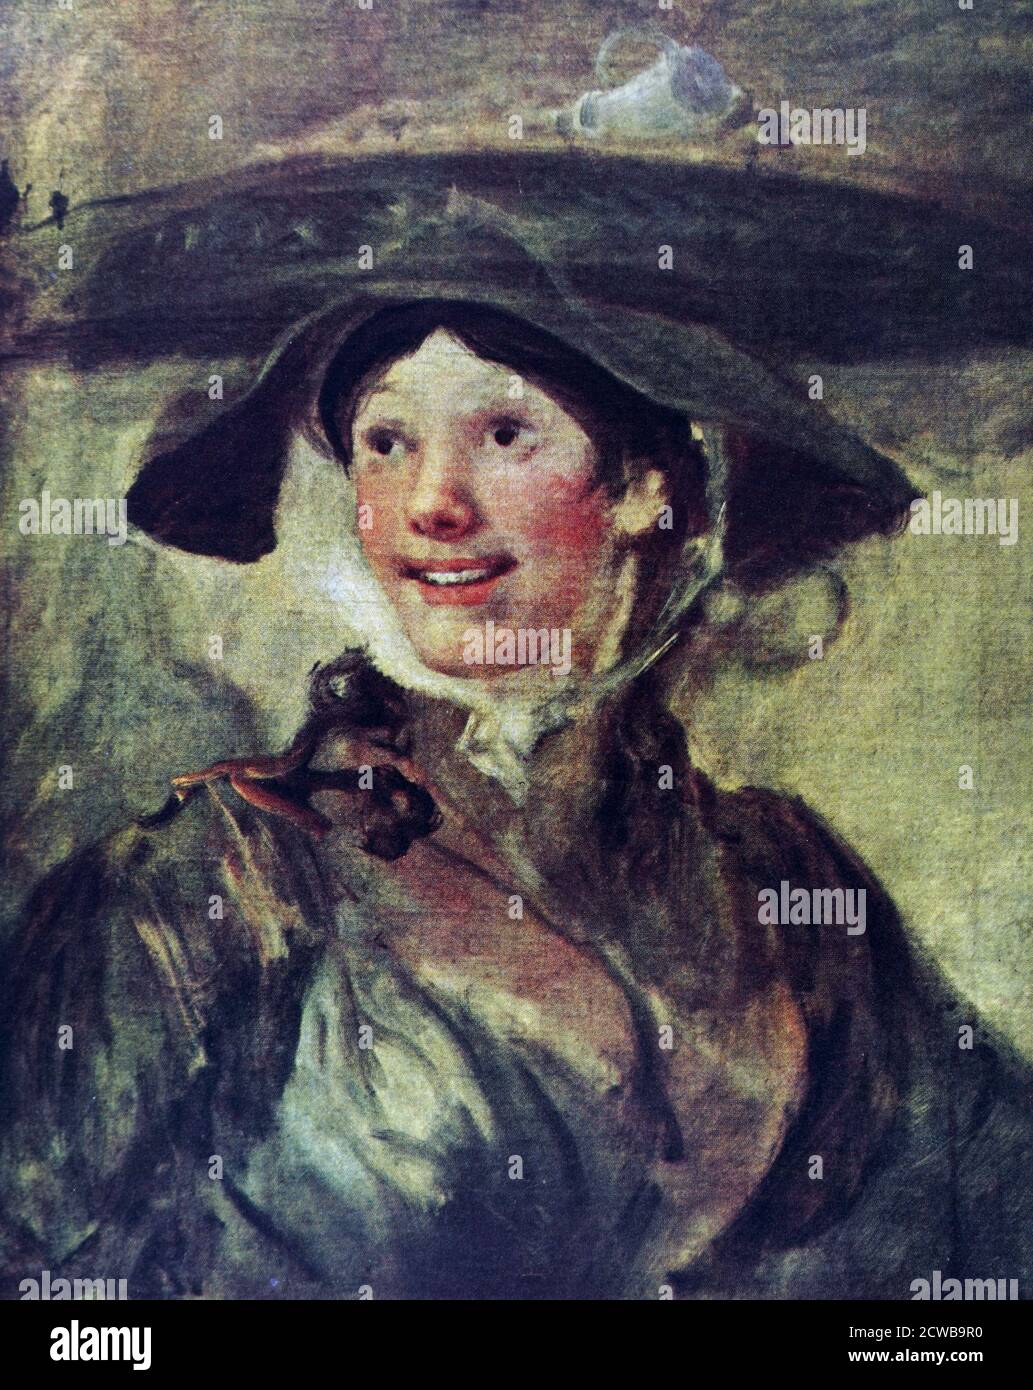 Painting titled 'The Shrimp Girl' by William Hogarth (1697-1764) an English painter, printmaker, pictorial satirist, social critic, and editorial cartoonist Stock Photo